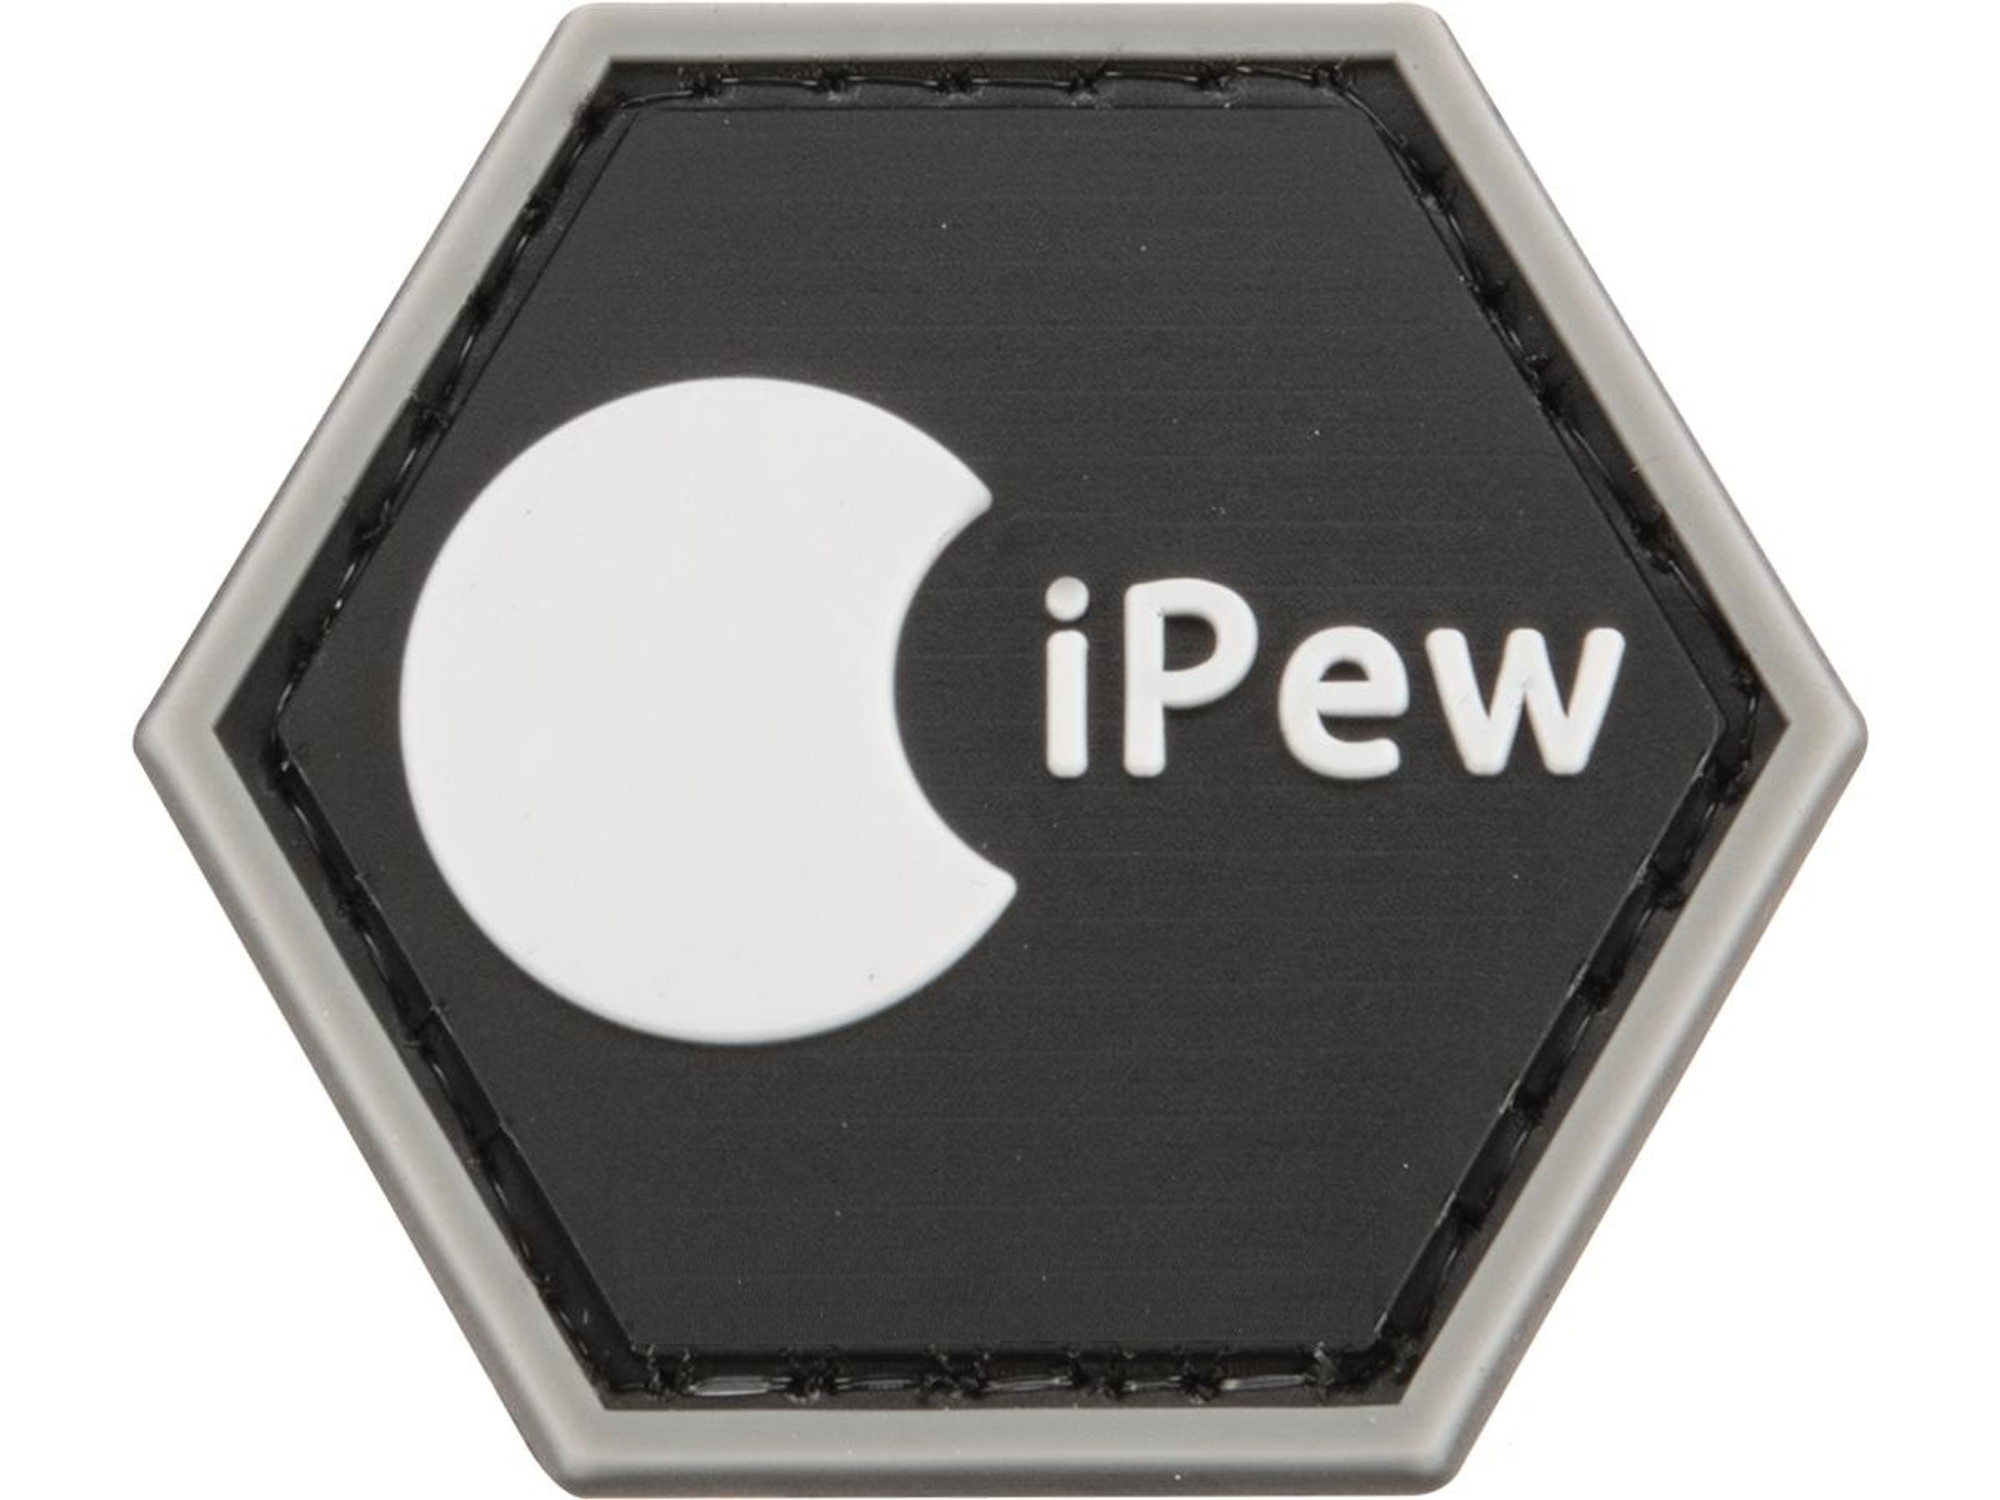 "Operator Profile PVC Hex Patch" Pop Culture Series 3 (Style: iPew)